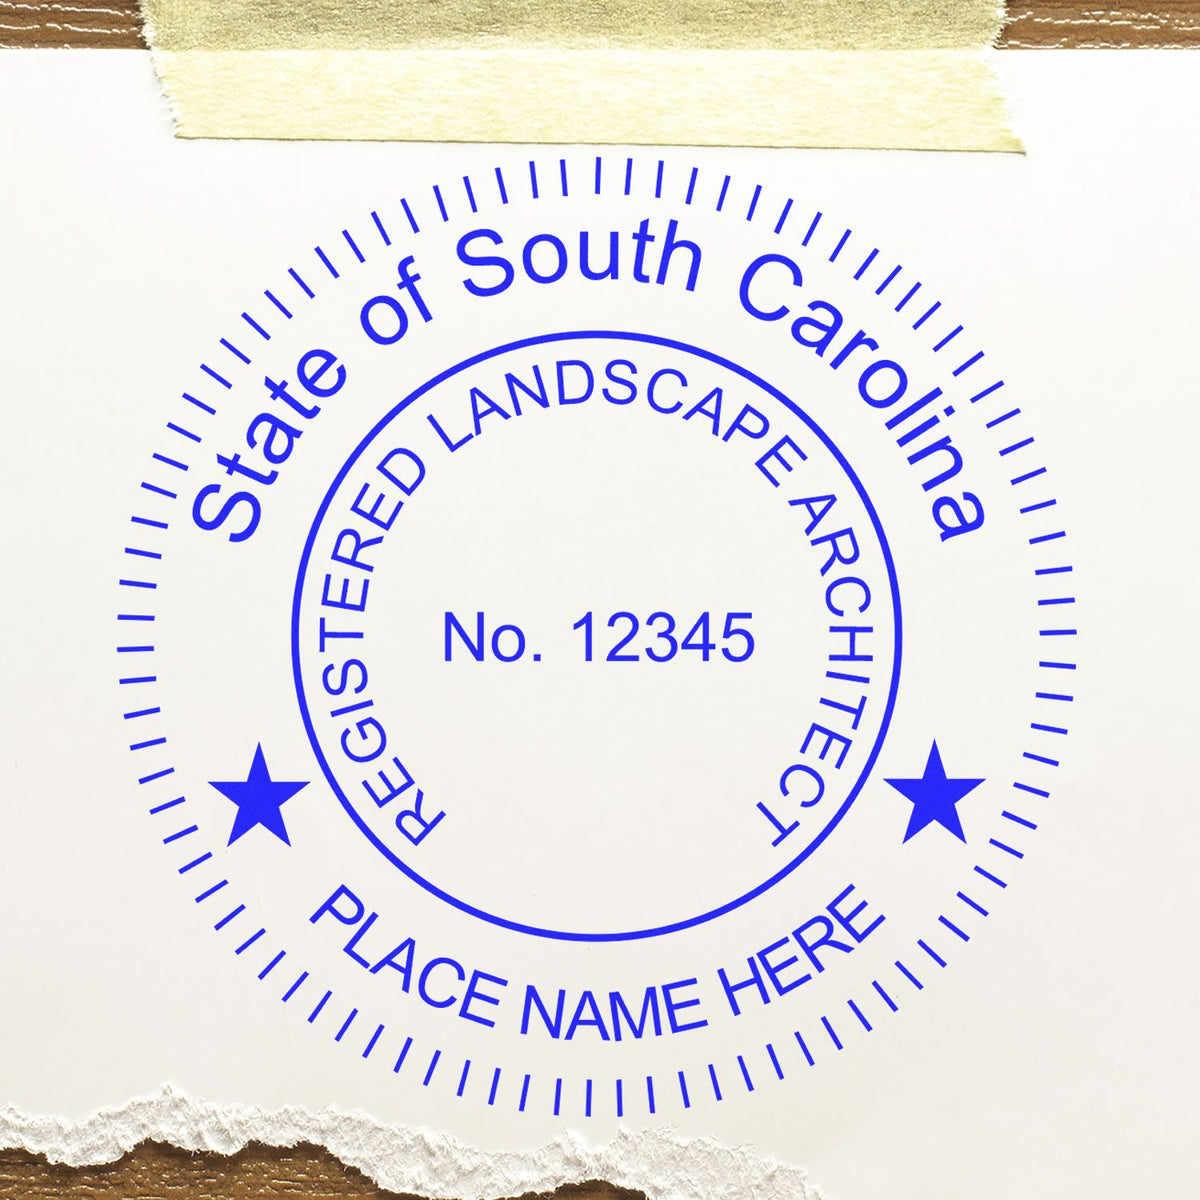 The Slim Pre-Inked South Carolina Landscape Architect Seal Stamp stamp impression comes to life with a crisp, detailed photo on paper - showcasing true professional quality.